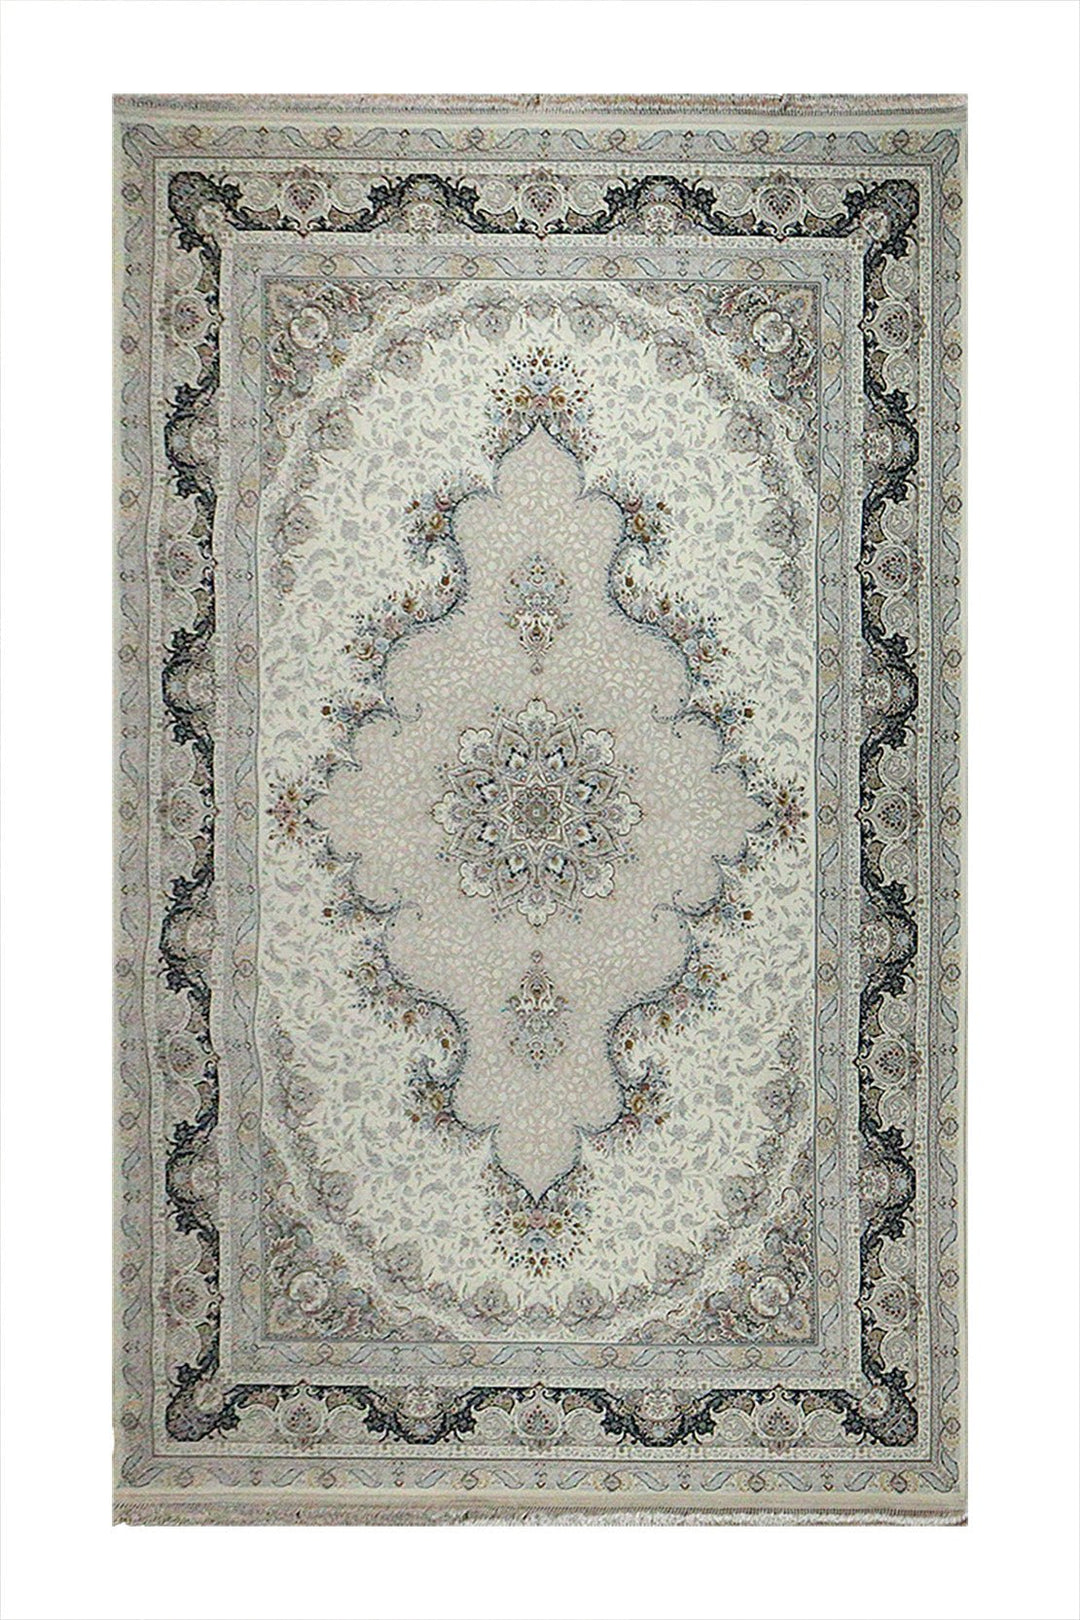 Iranian Premium Quality Authentic 1500 Rug - 6.5 x 9.8 FT - Cream - Resilient Construction for Long-Lasting Use - V Surfaces